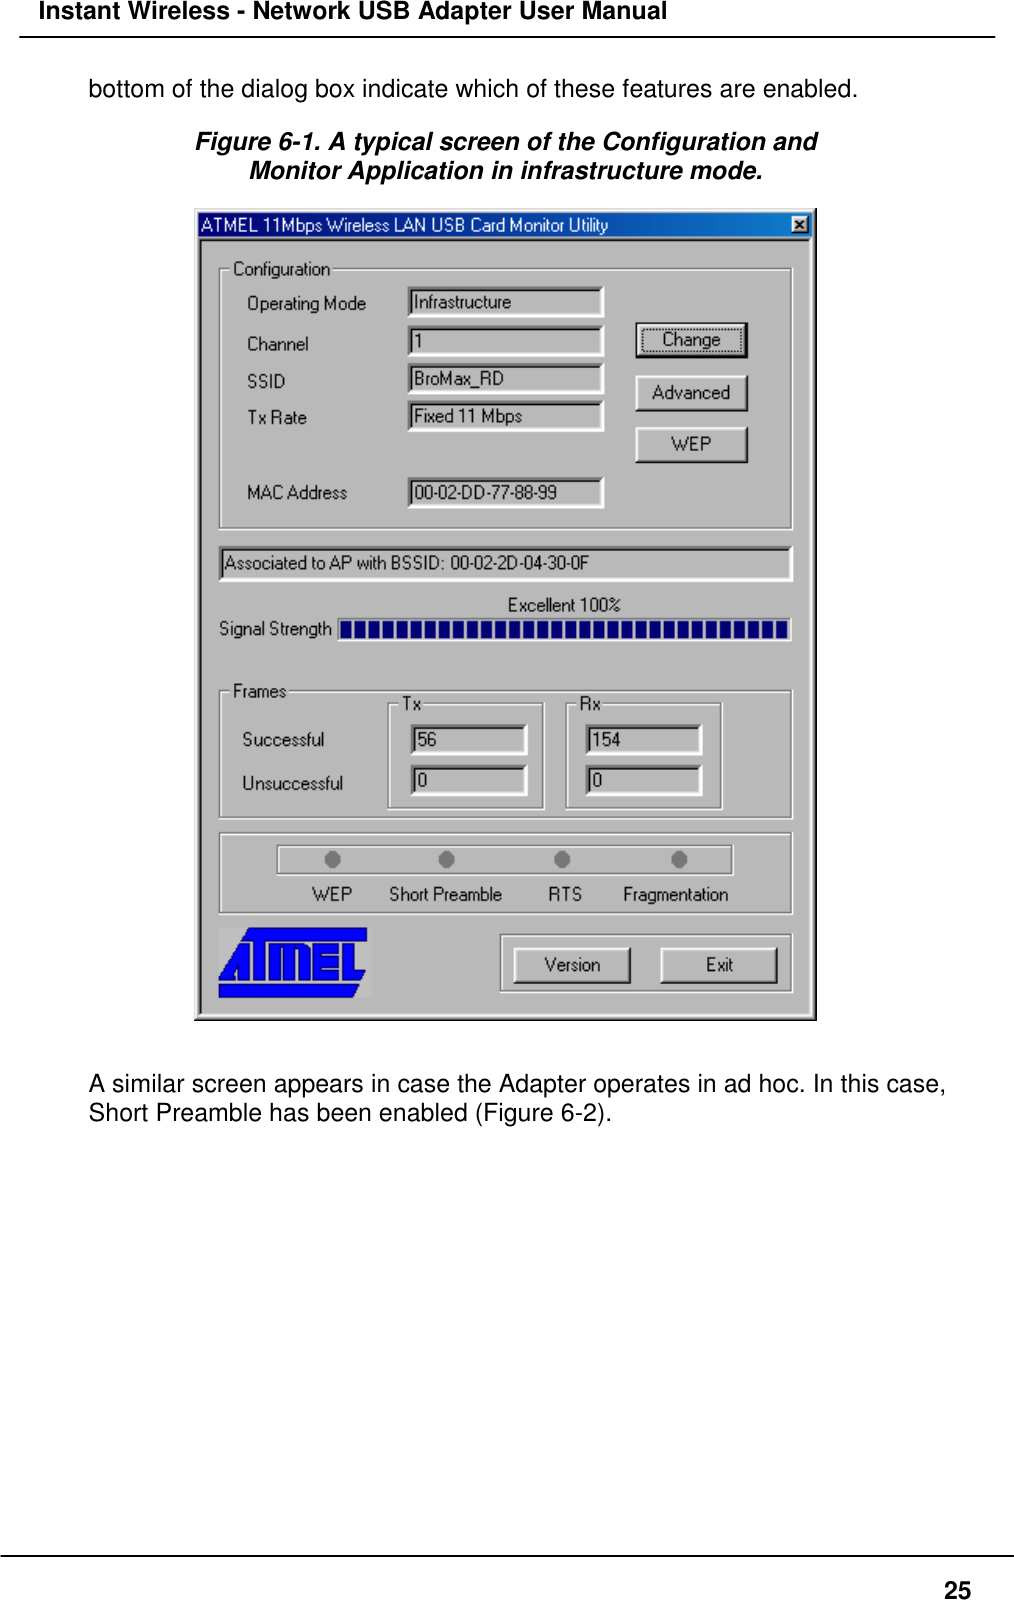 Instant Wireless - Network USB Adapter User Manual25bottom of the dialog box indicate which of these features are enabled.Figure 6-1. A typical screen of the Configuration andMonitor Application in infrastructure mode.A similar screen appears in case the Adapter operates in ad hoc. In this case,Short Preamble has been enabled (Figure 6-2).